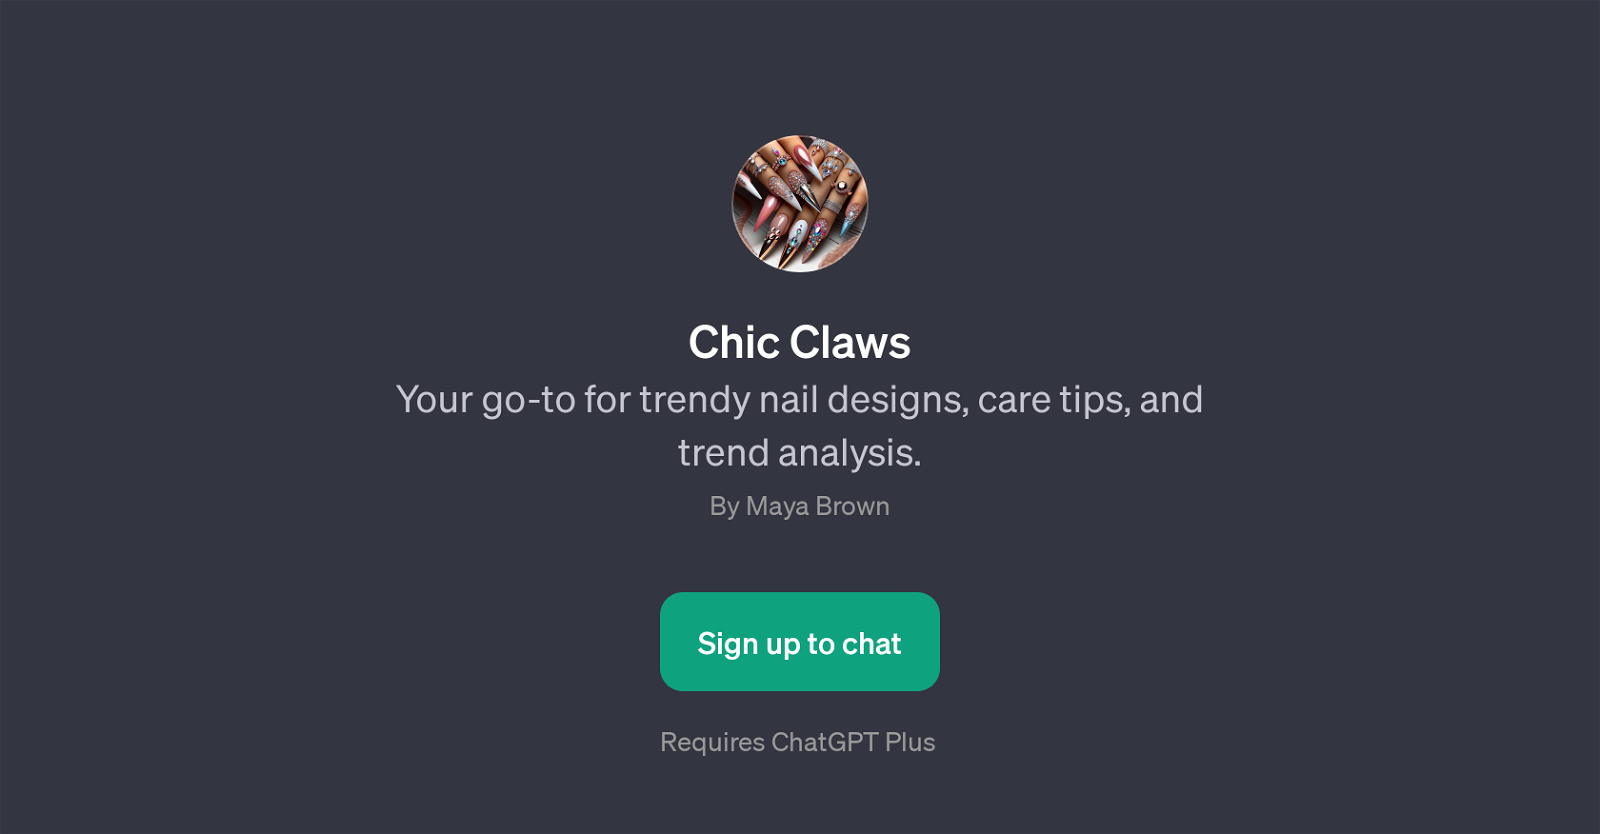 Chic Claws website